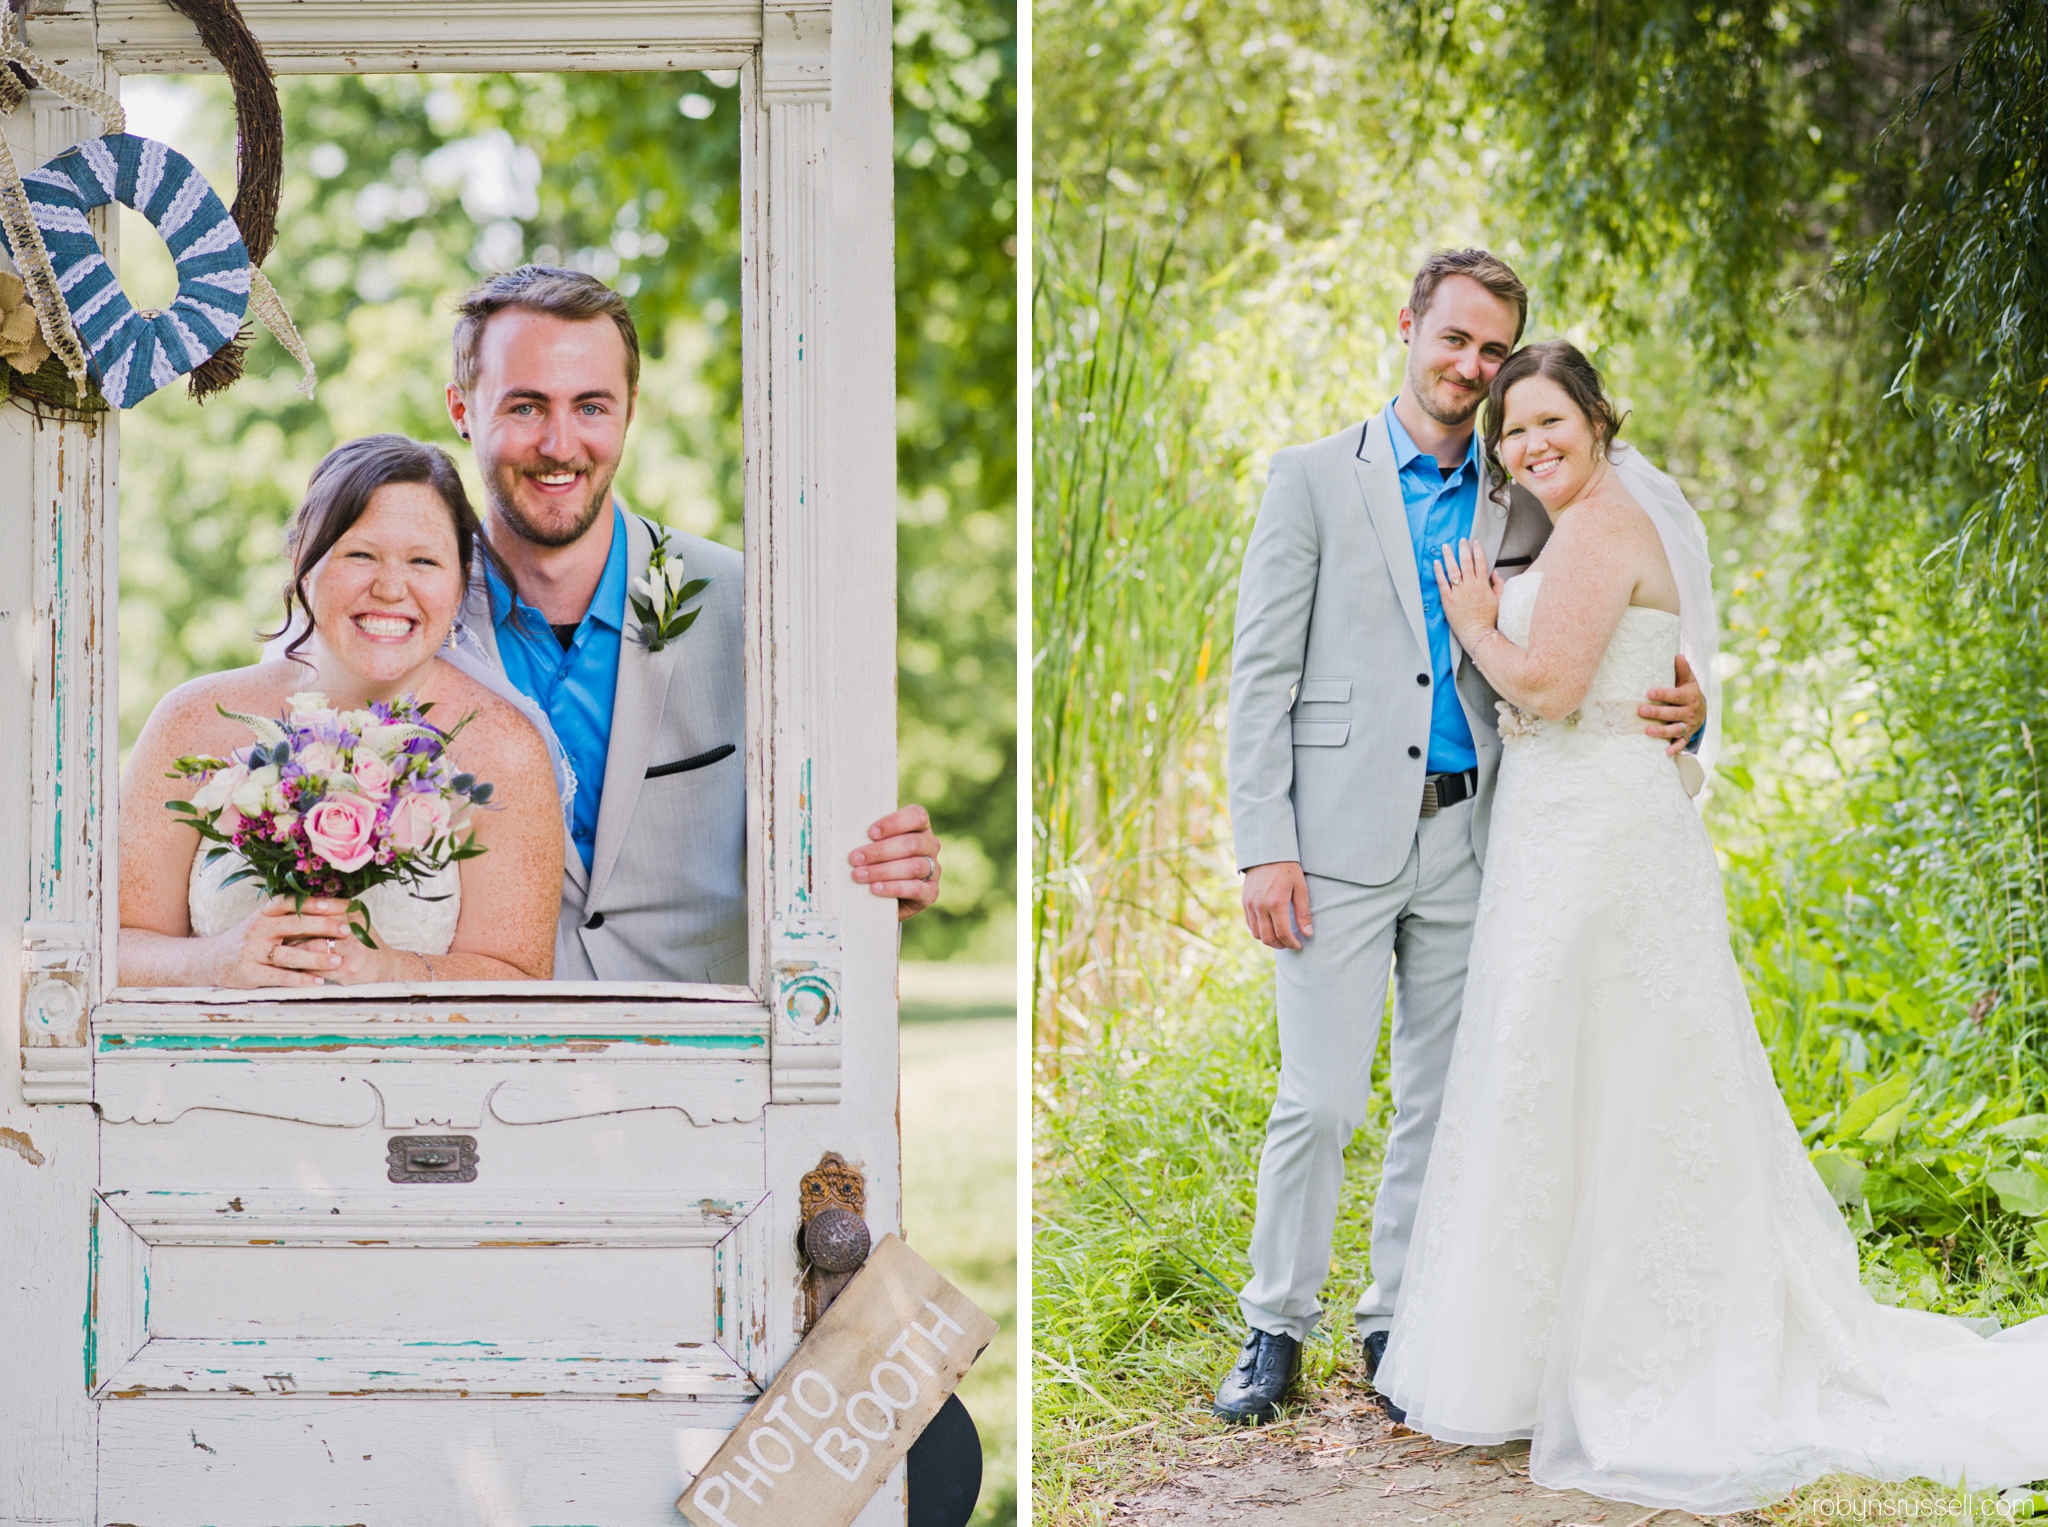 23-bride-and-groom-in-front-of-outdoor-photo-booth.jpg